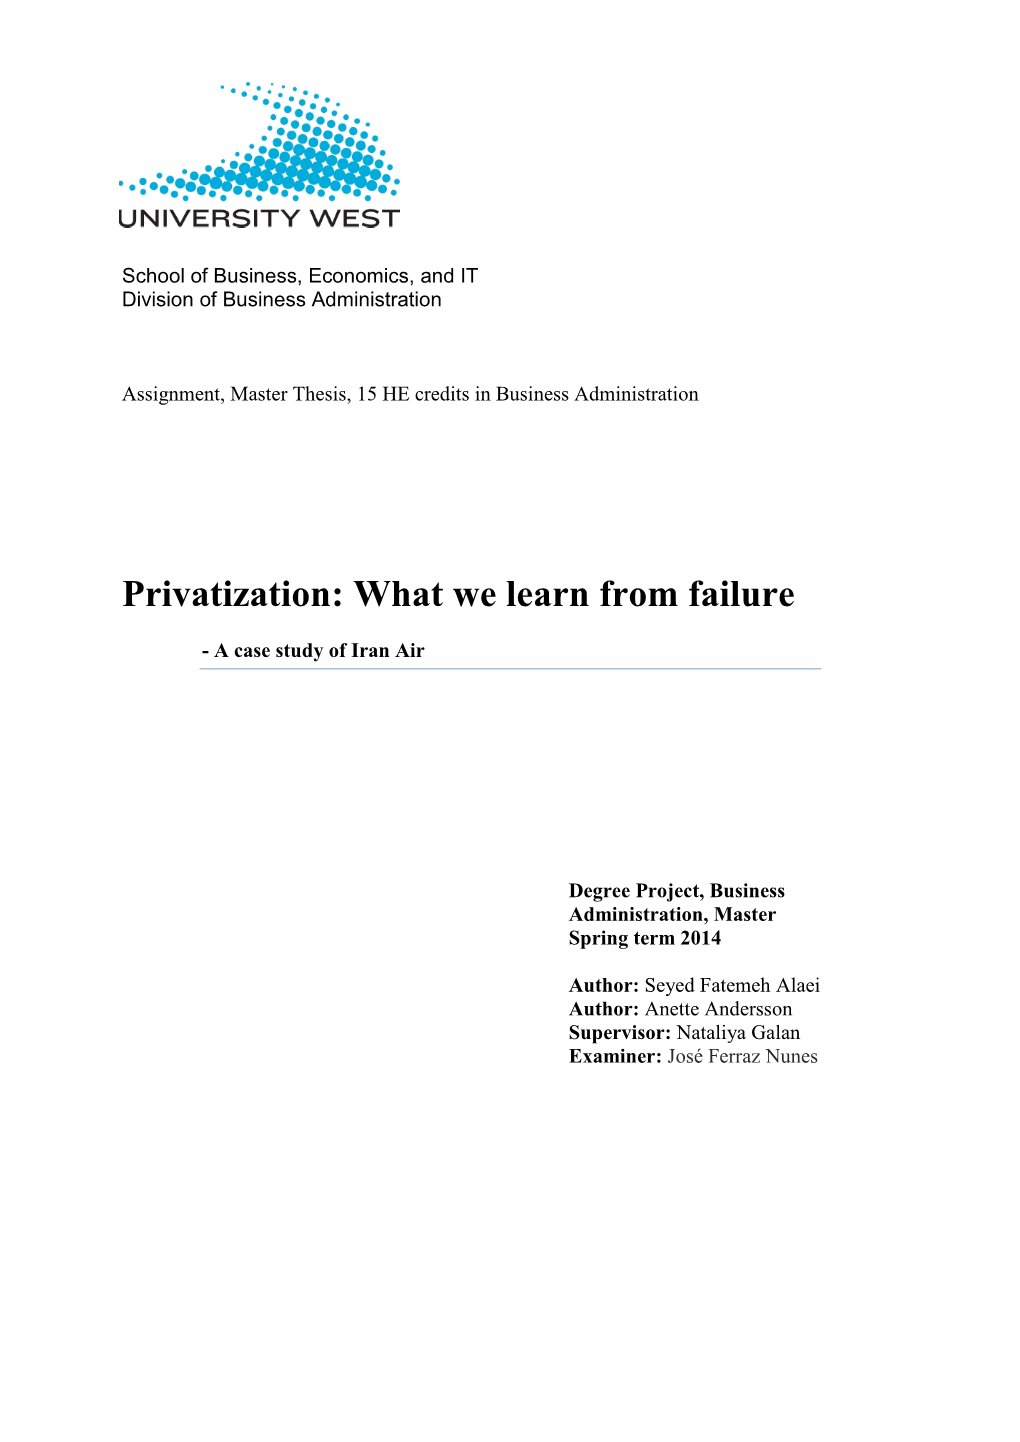 Privatization: What We Learn from Failure